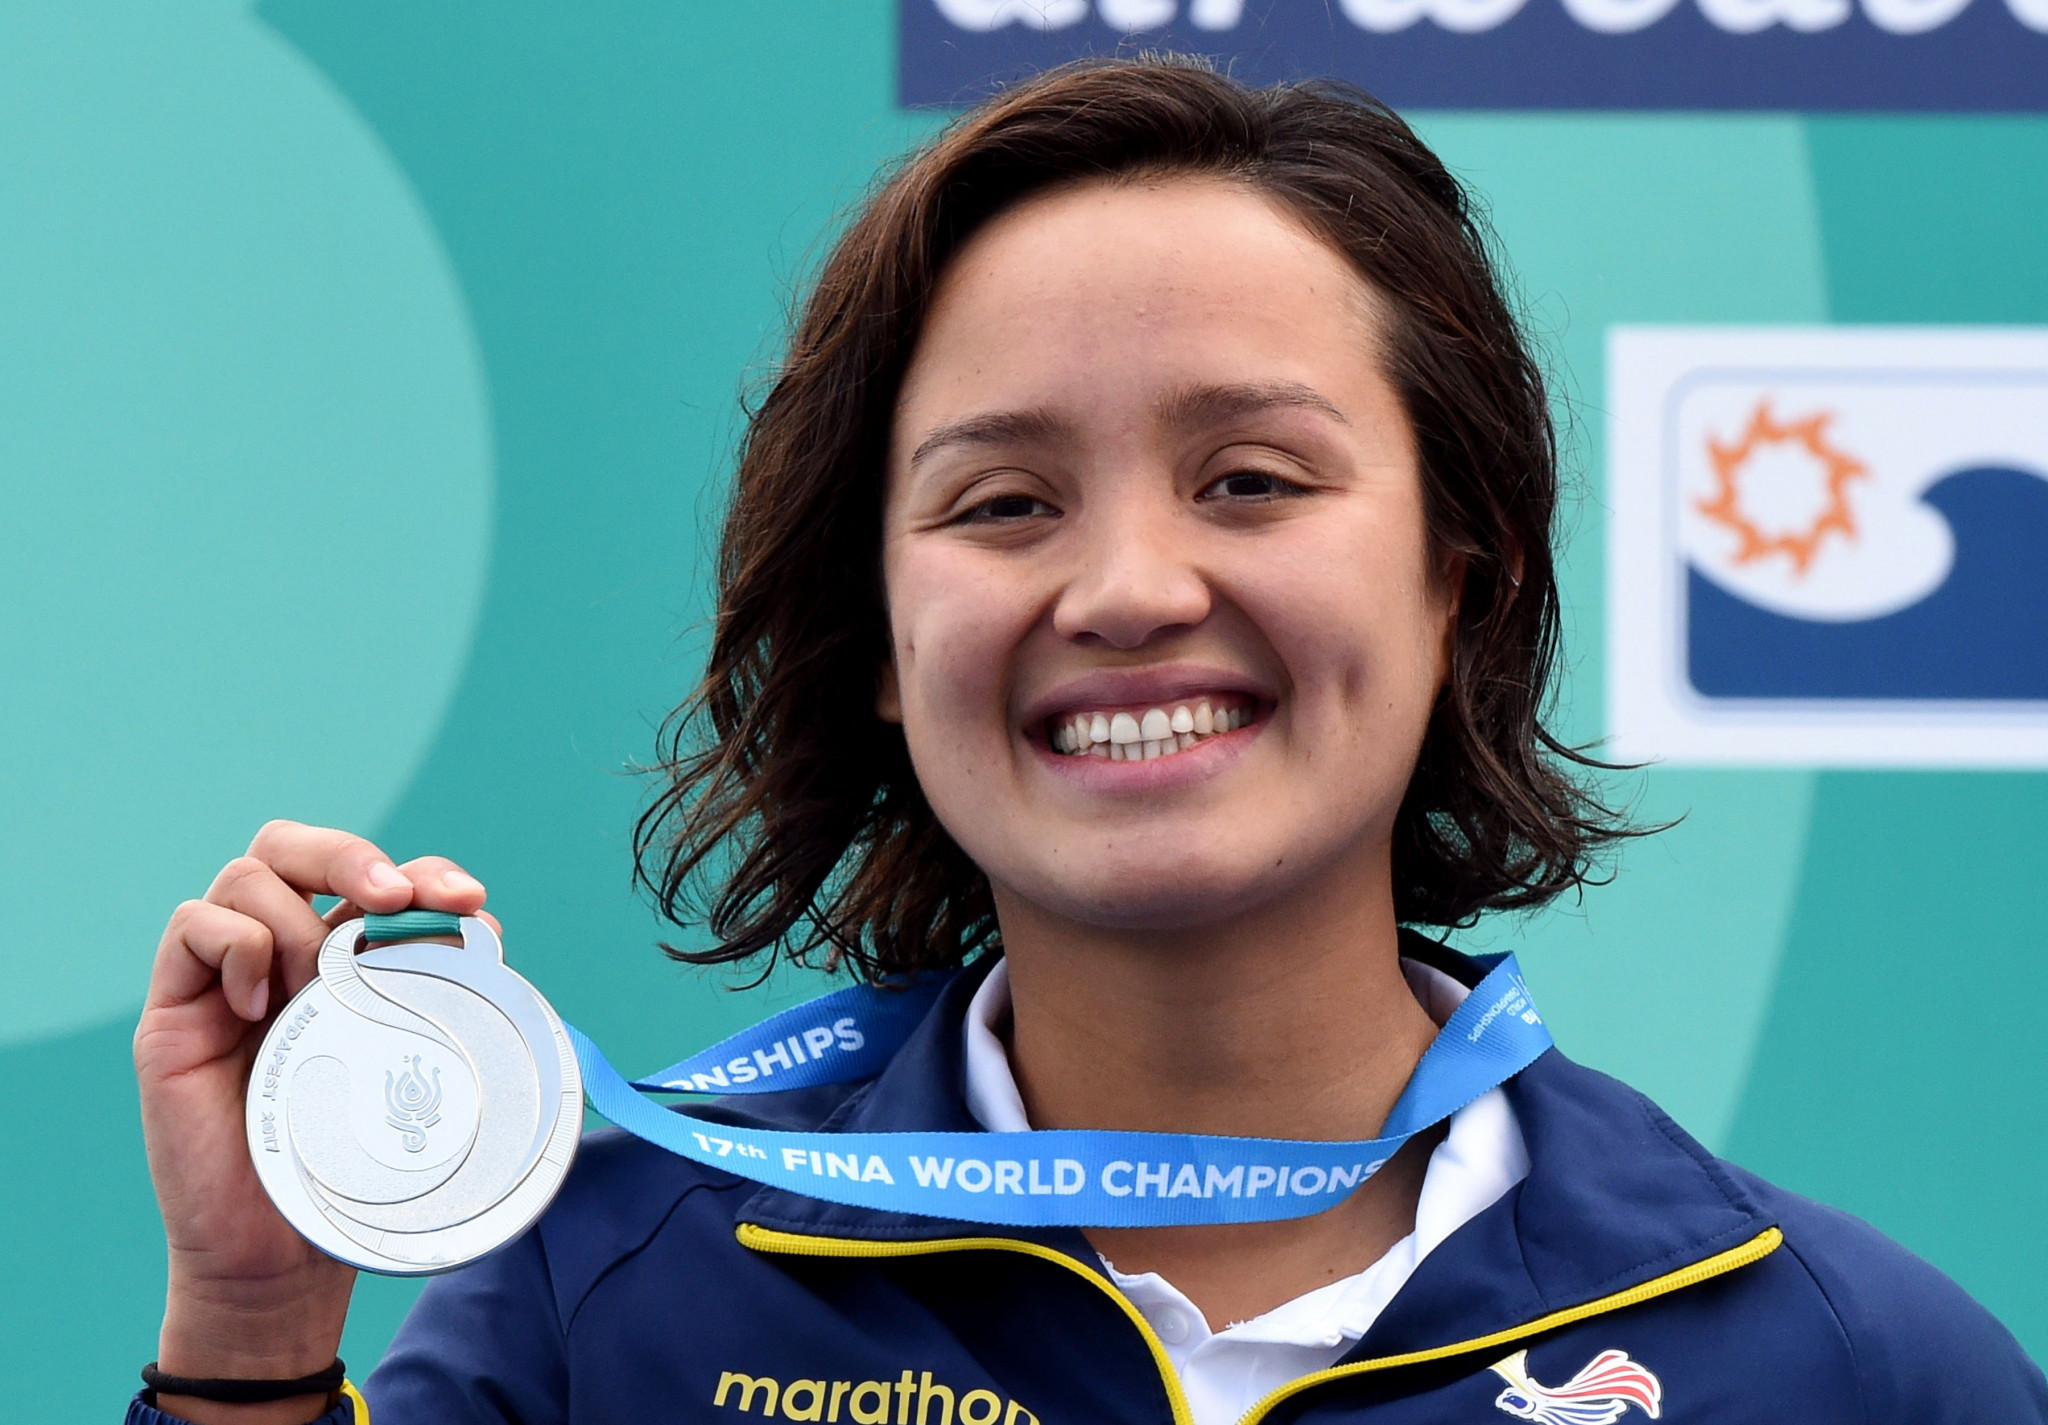 Samantha Arevalo Salinas from Ecuador, silver medallist at the 2017 World Championships, will be looking to disrupt the chances of Brazil's Ana Marcela Cunha ©FINA